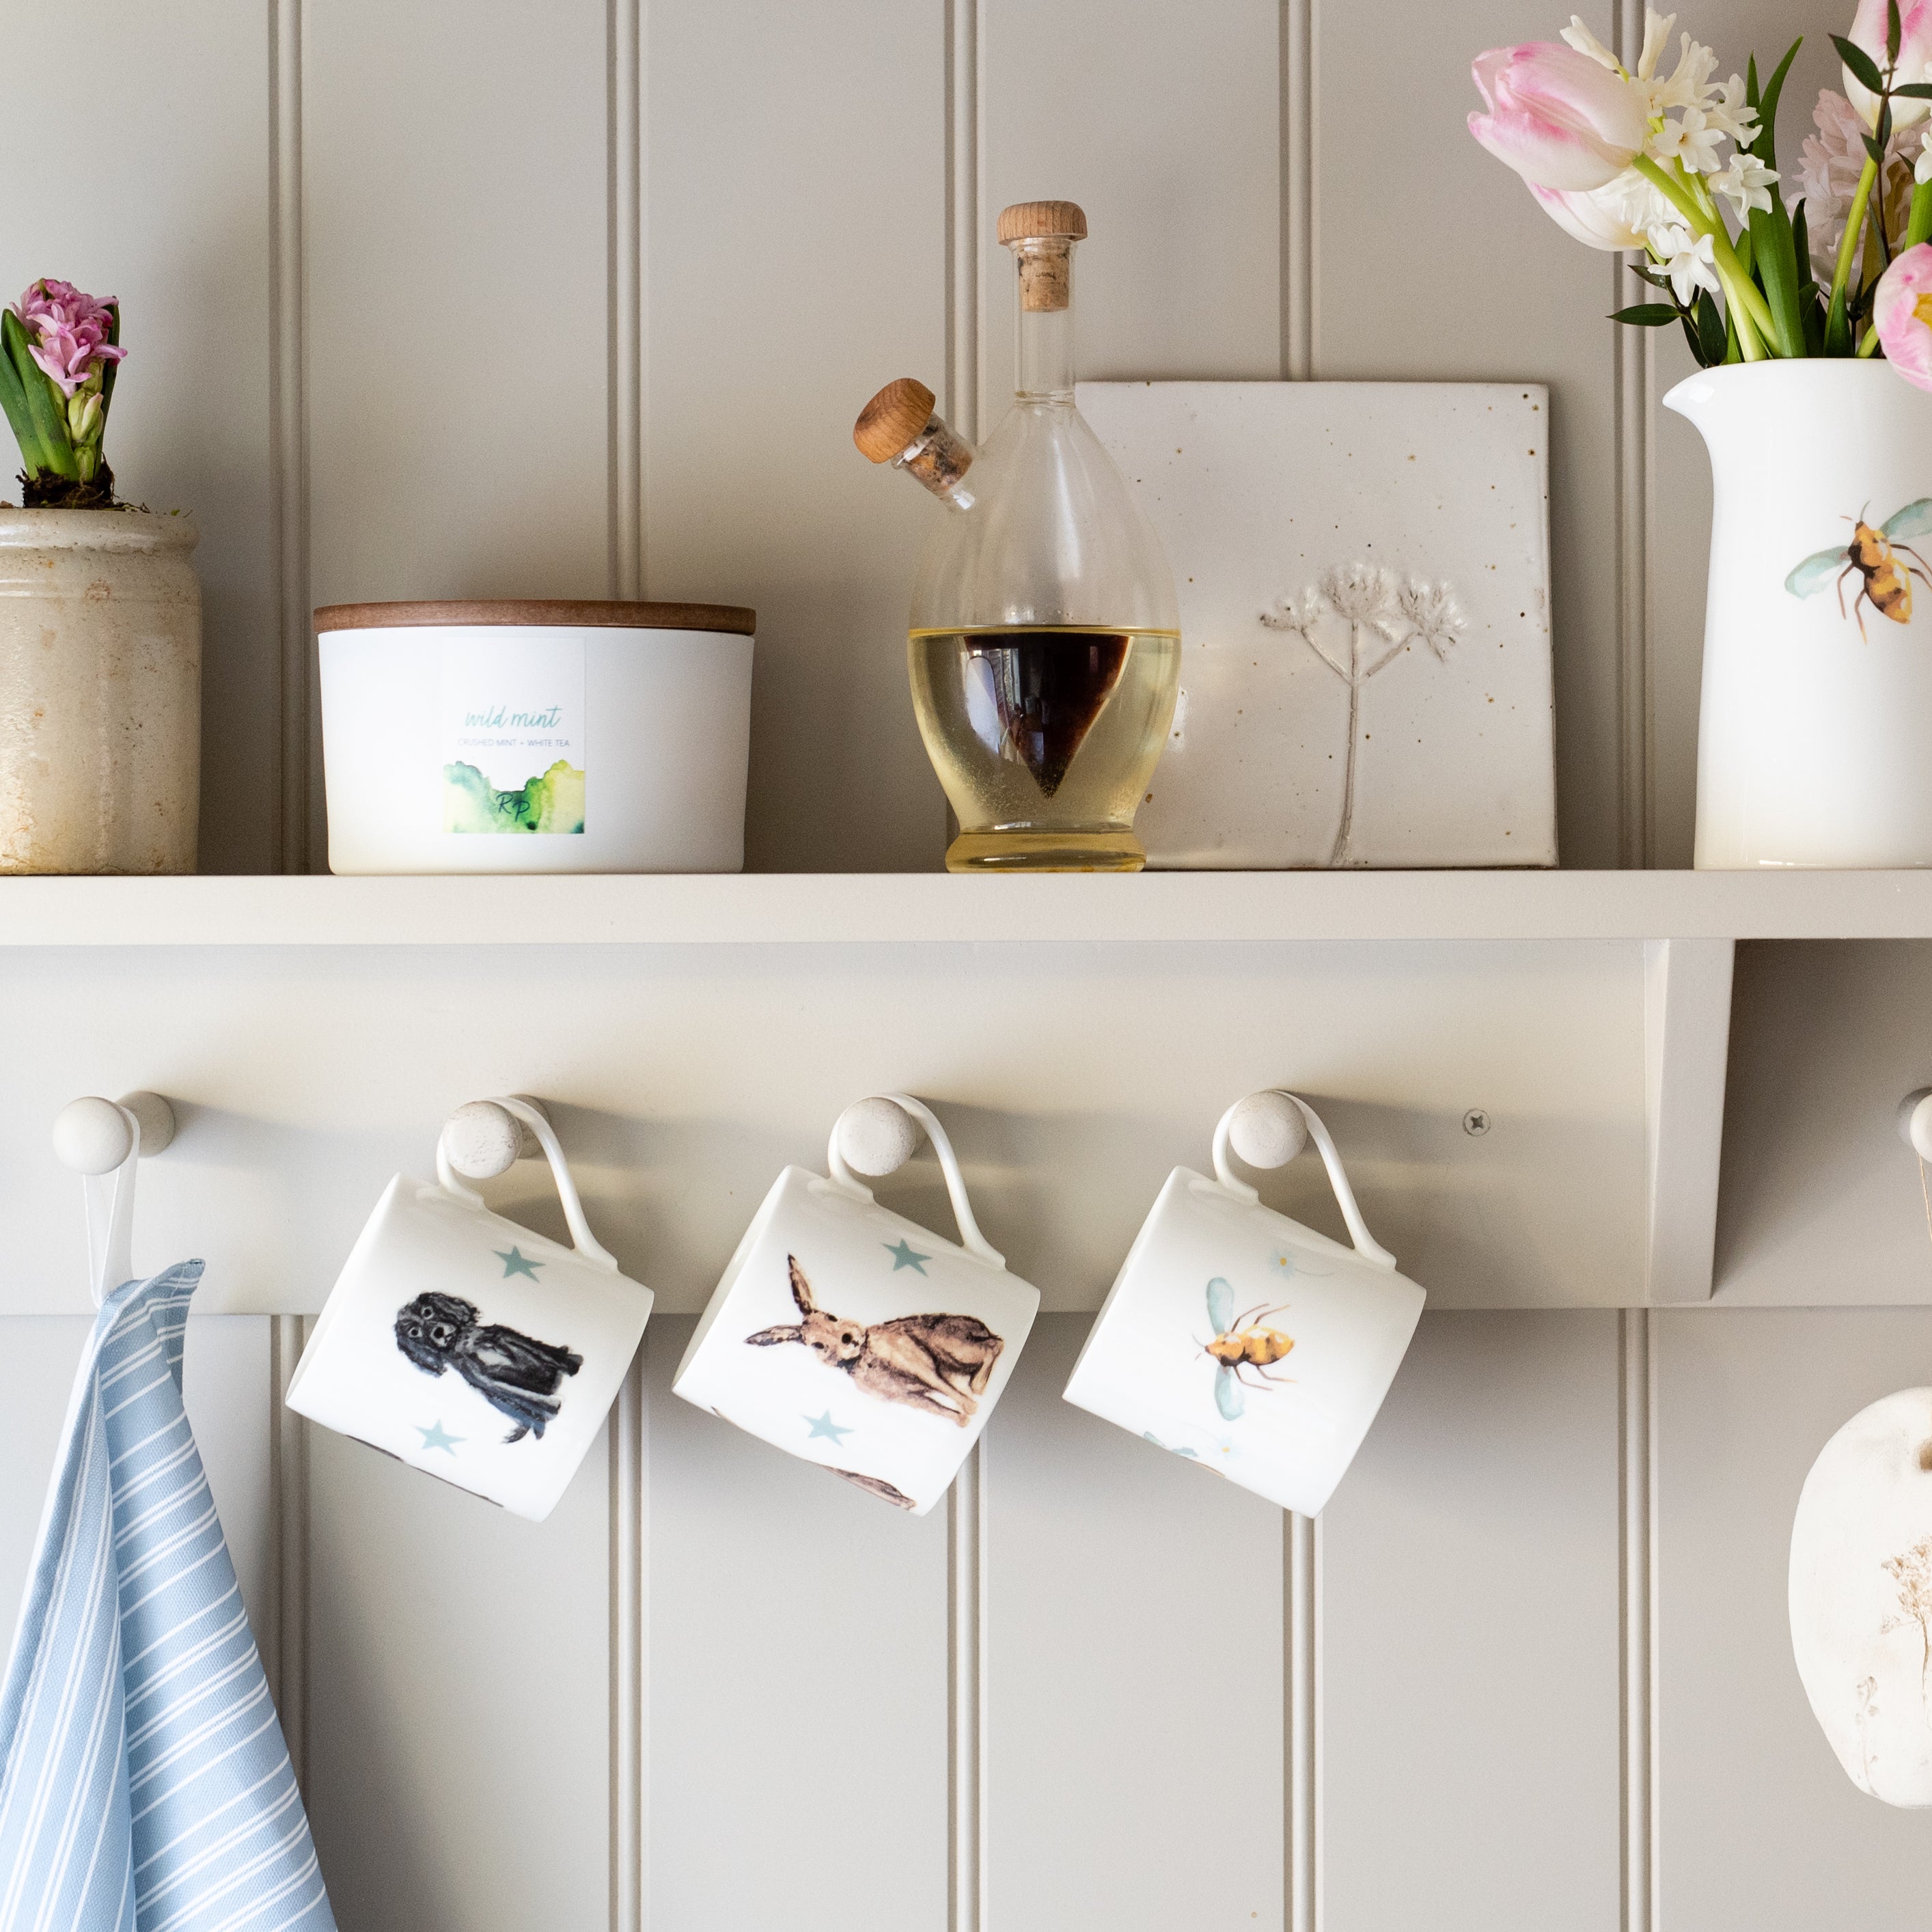 Fine Bone China Mugs by Rebecca Pitcher hanging on a shelf in a country kitchen